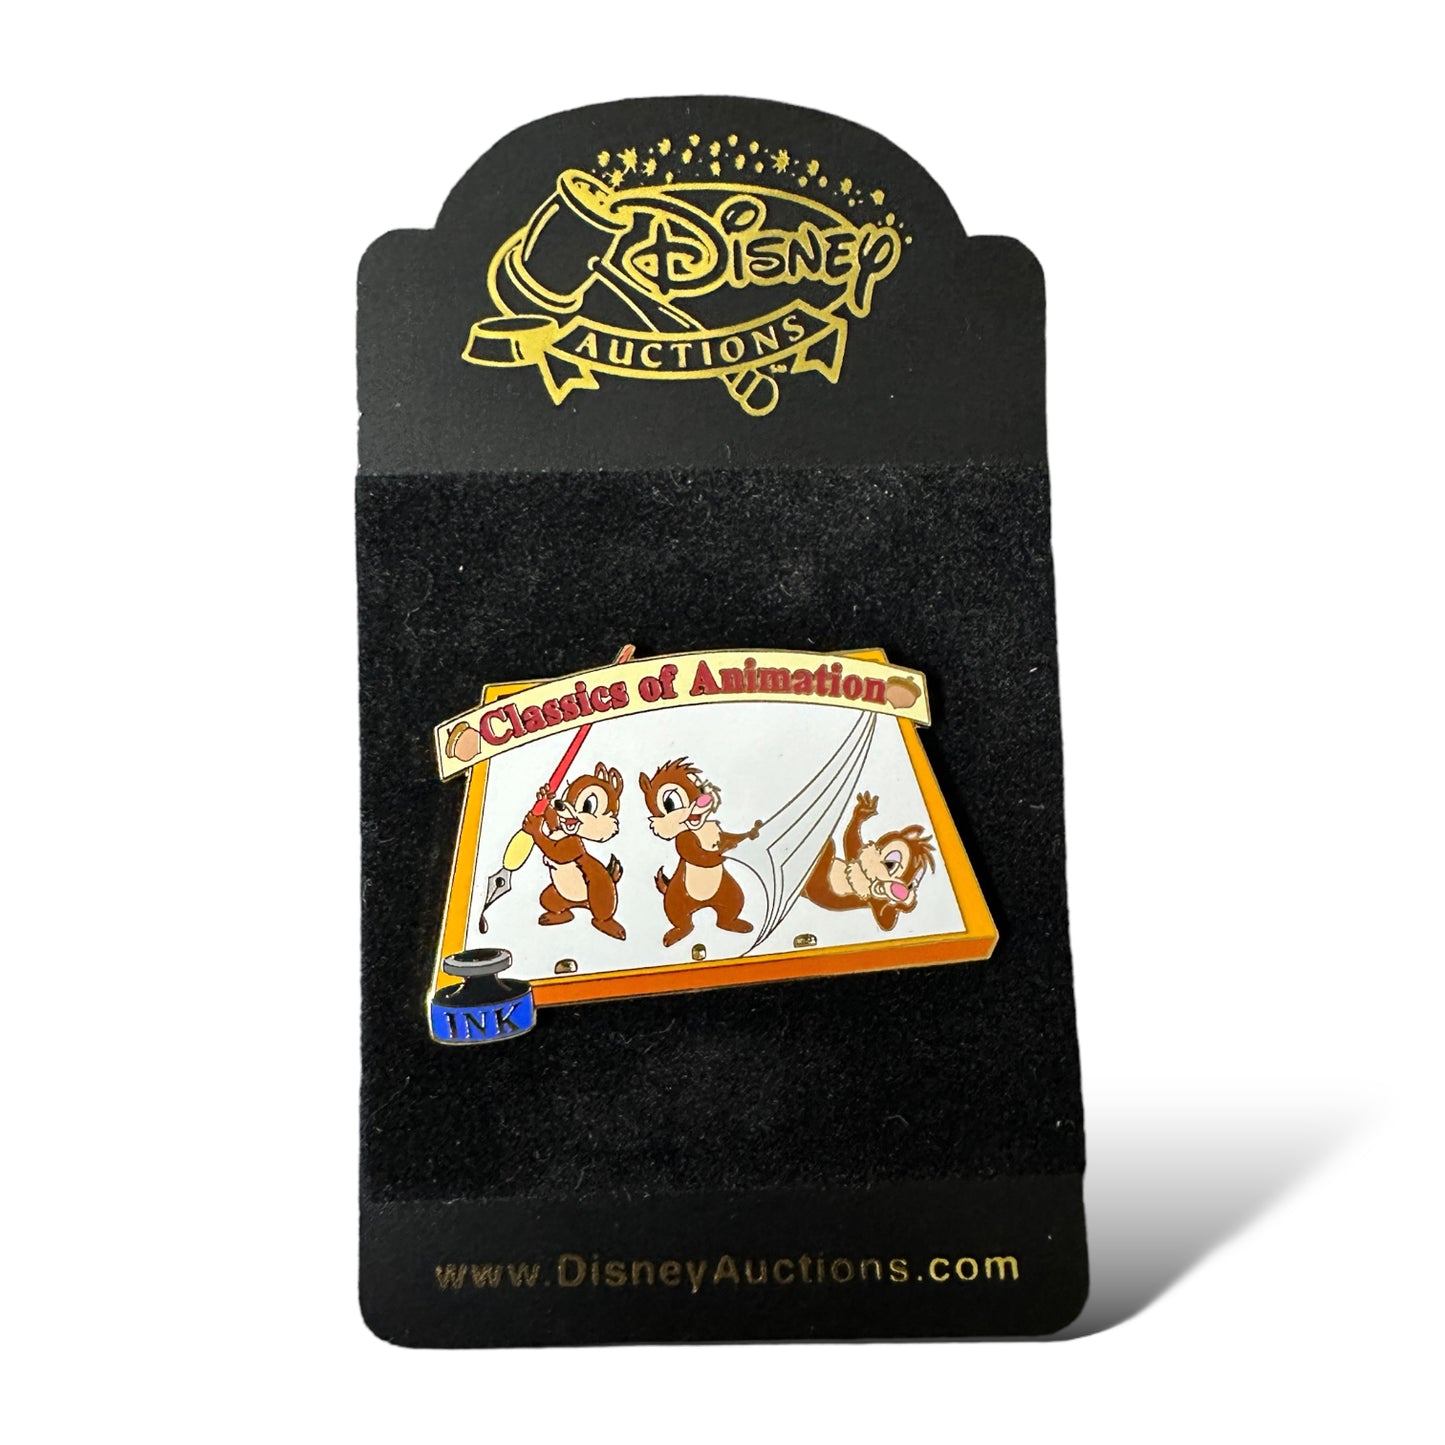 Disney Auctions Classics of Animation Chip n' Dale Pin